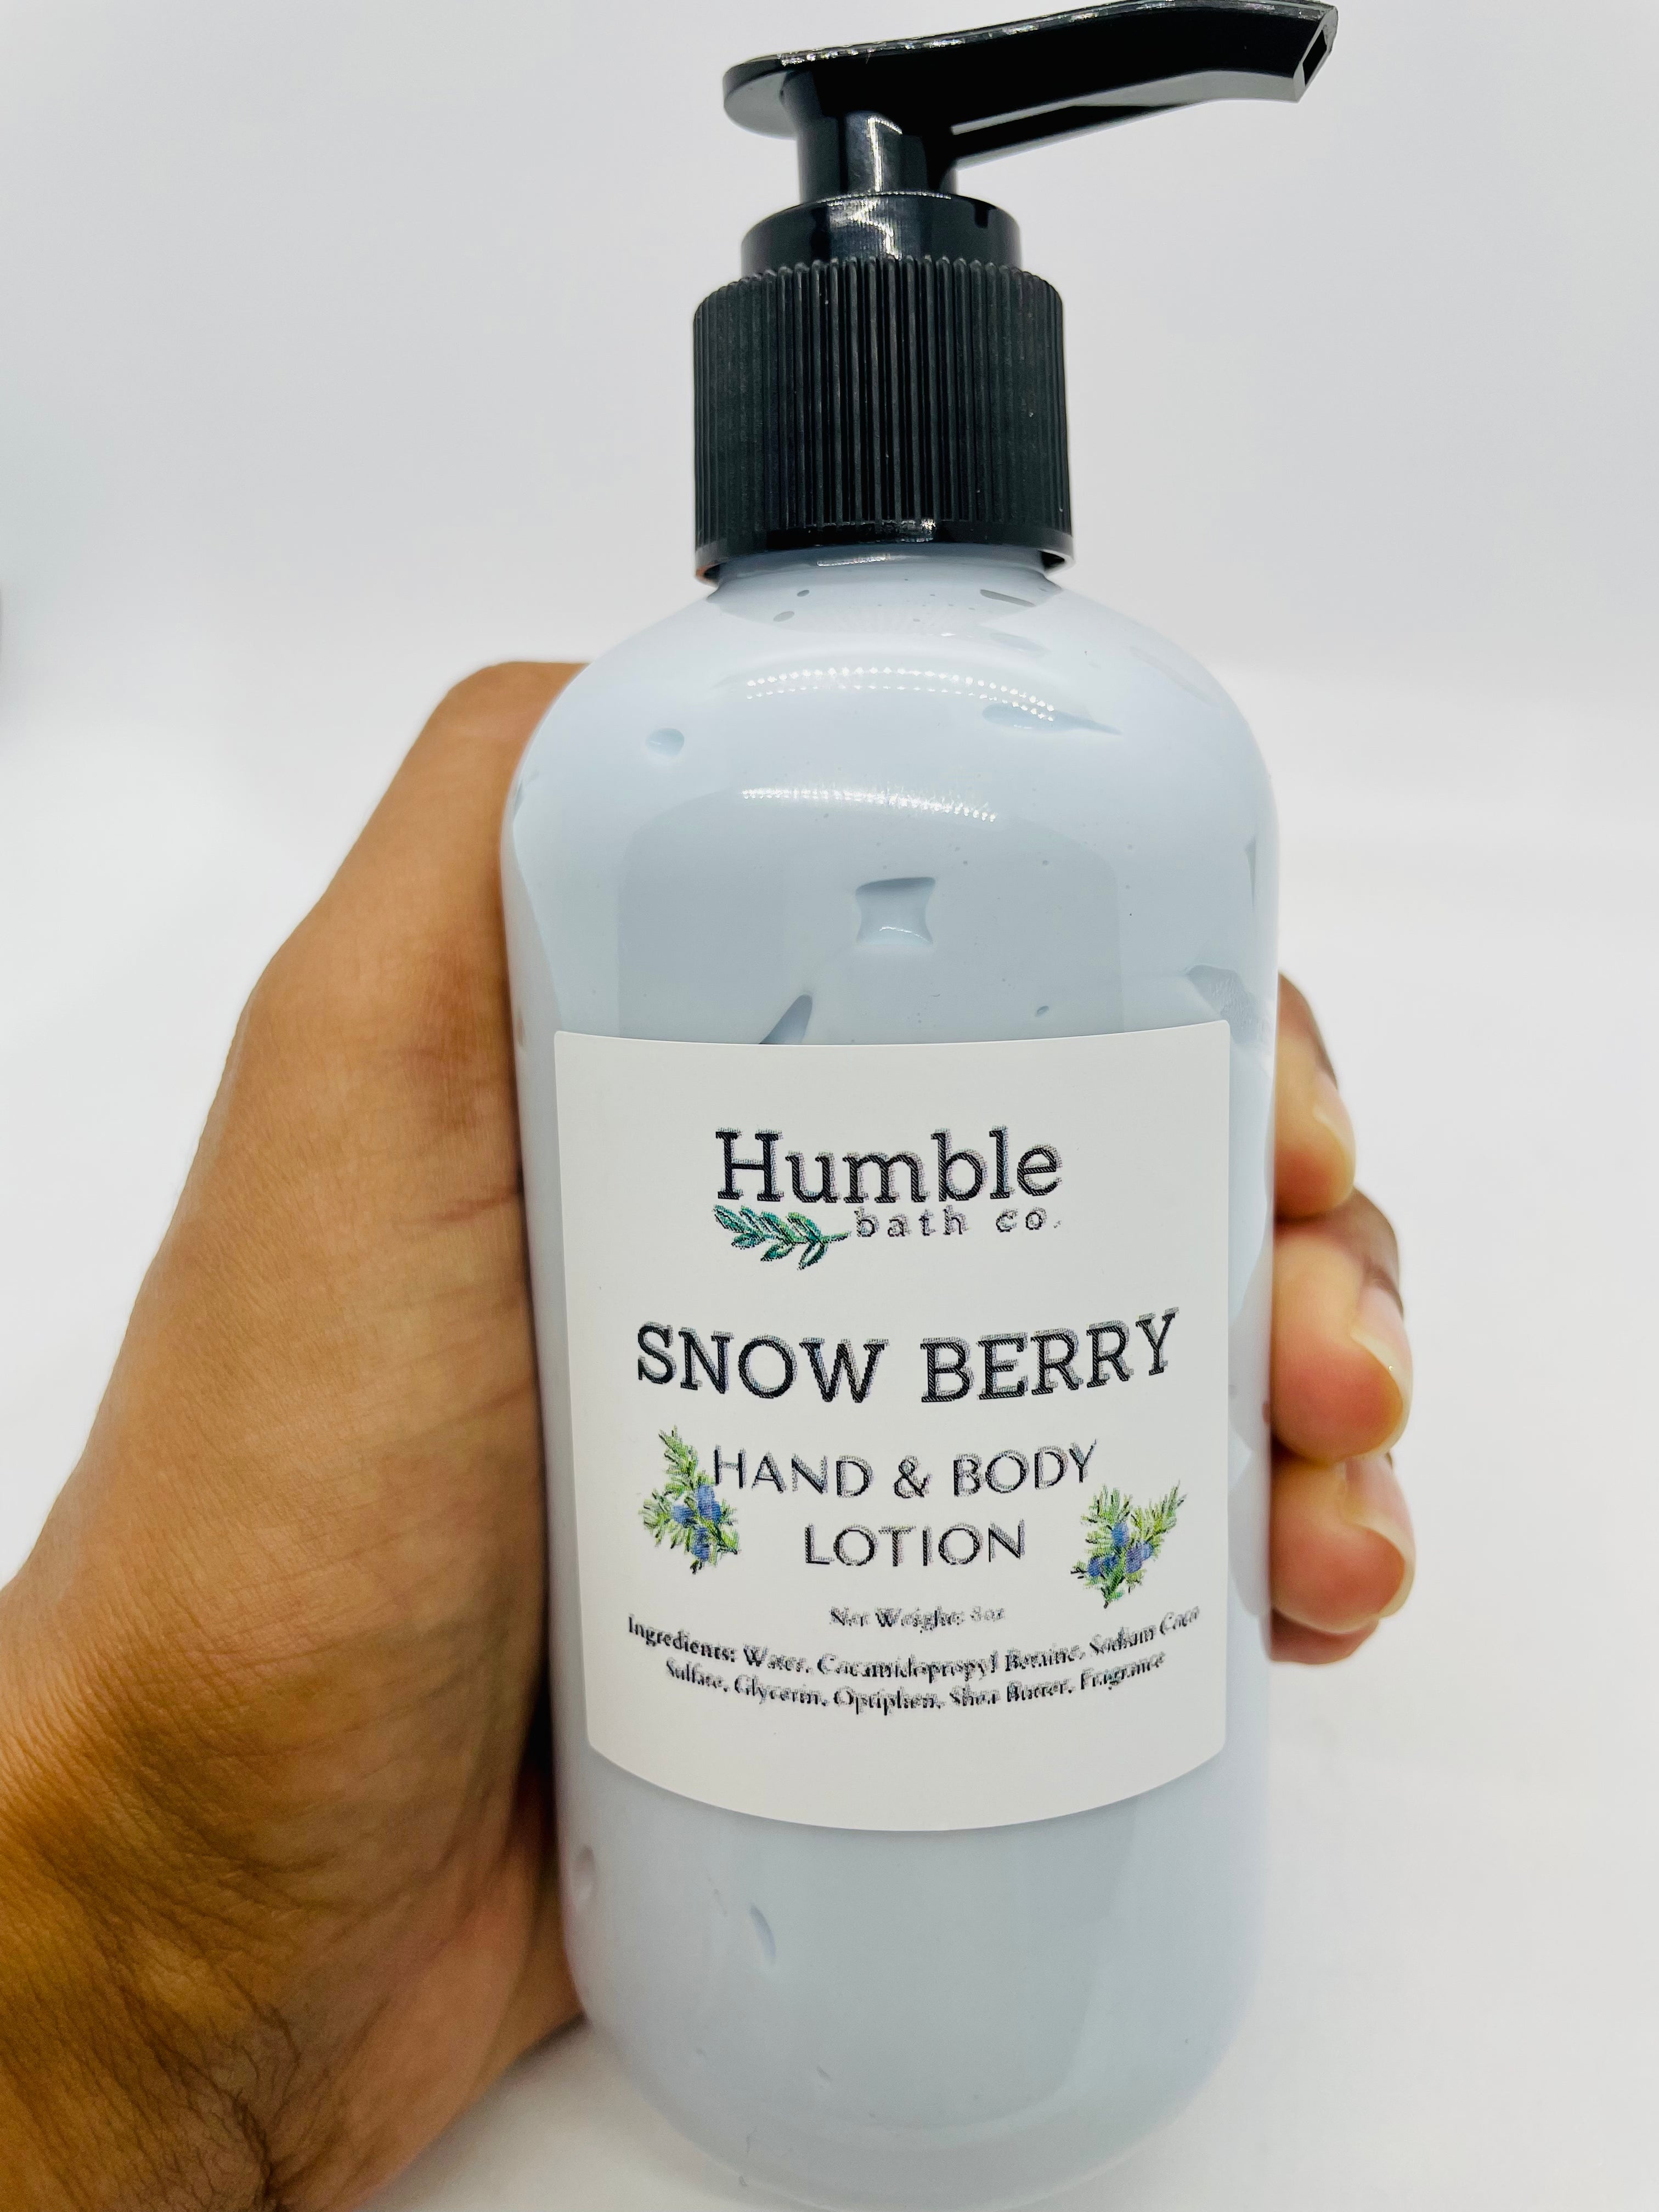 Snow Berry Hand & Body Lotion